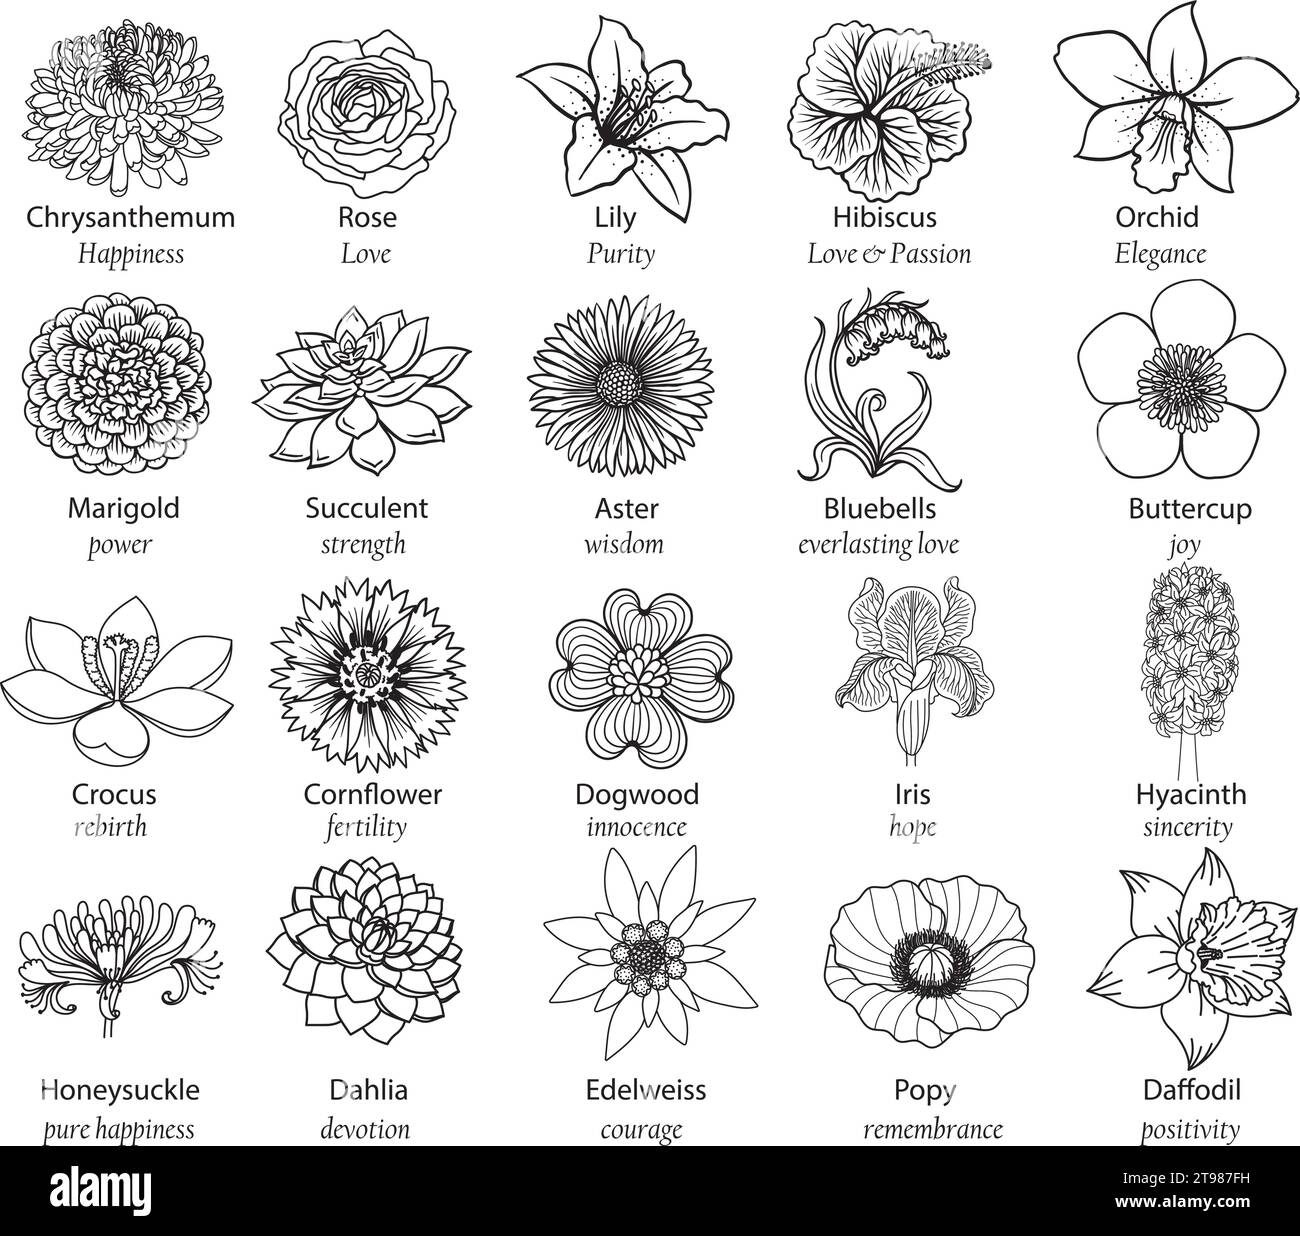 20 flowers with good meanings. Vector illustration. Stock Vector